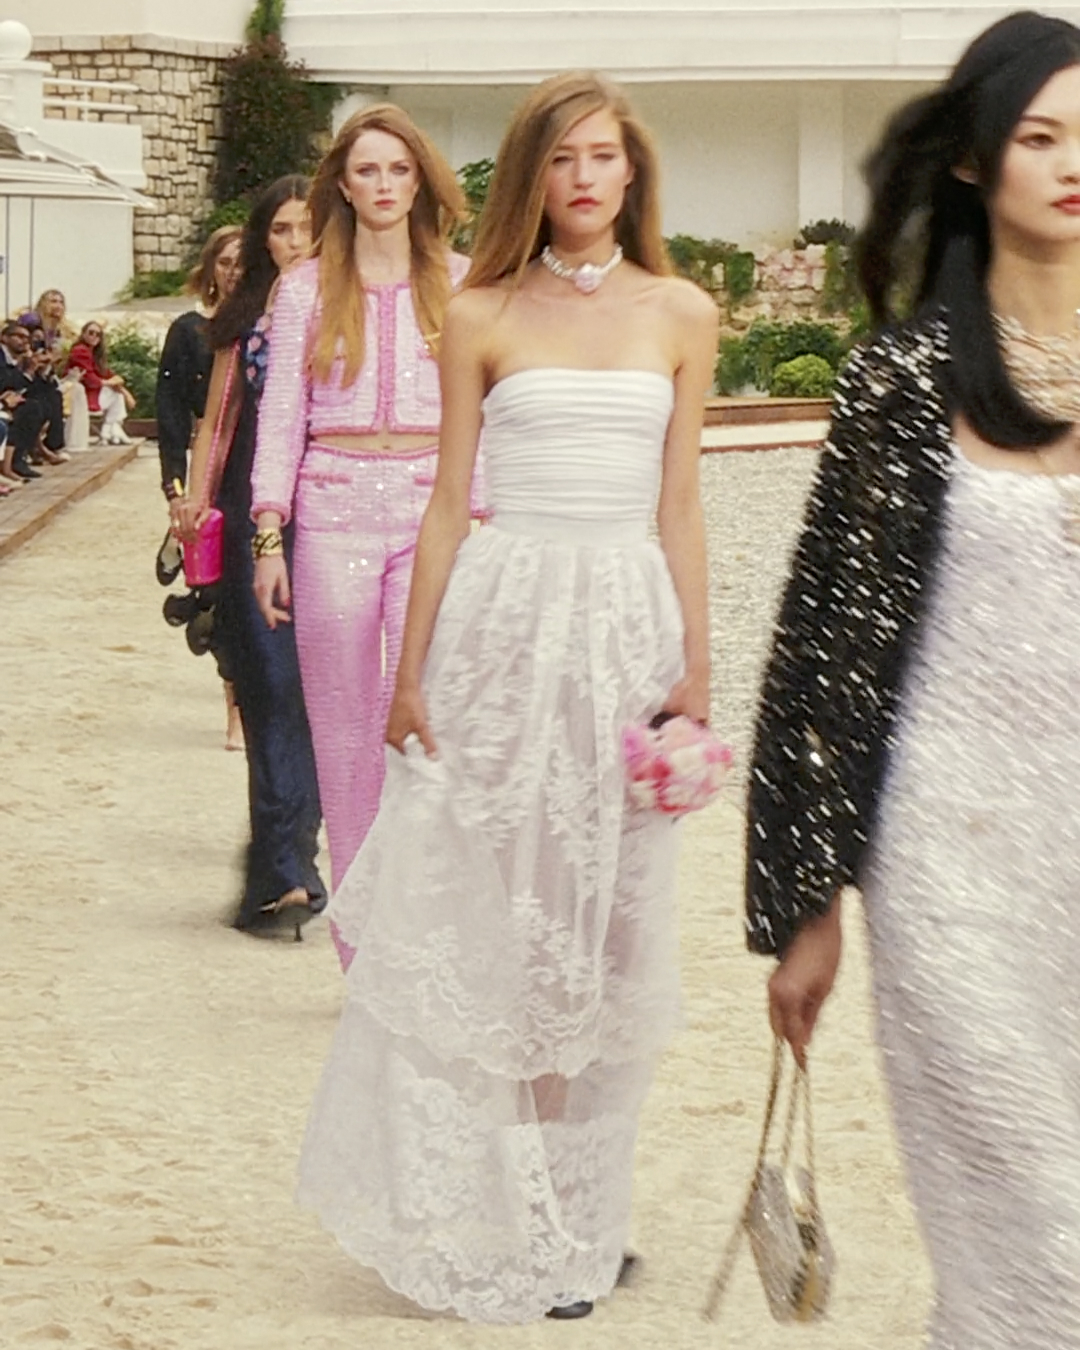 CHANEL on X: The Cruise 2022/23 collection, an ode to